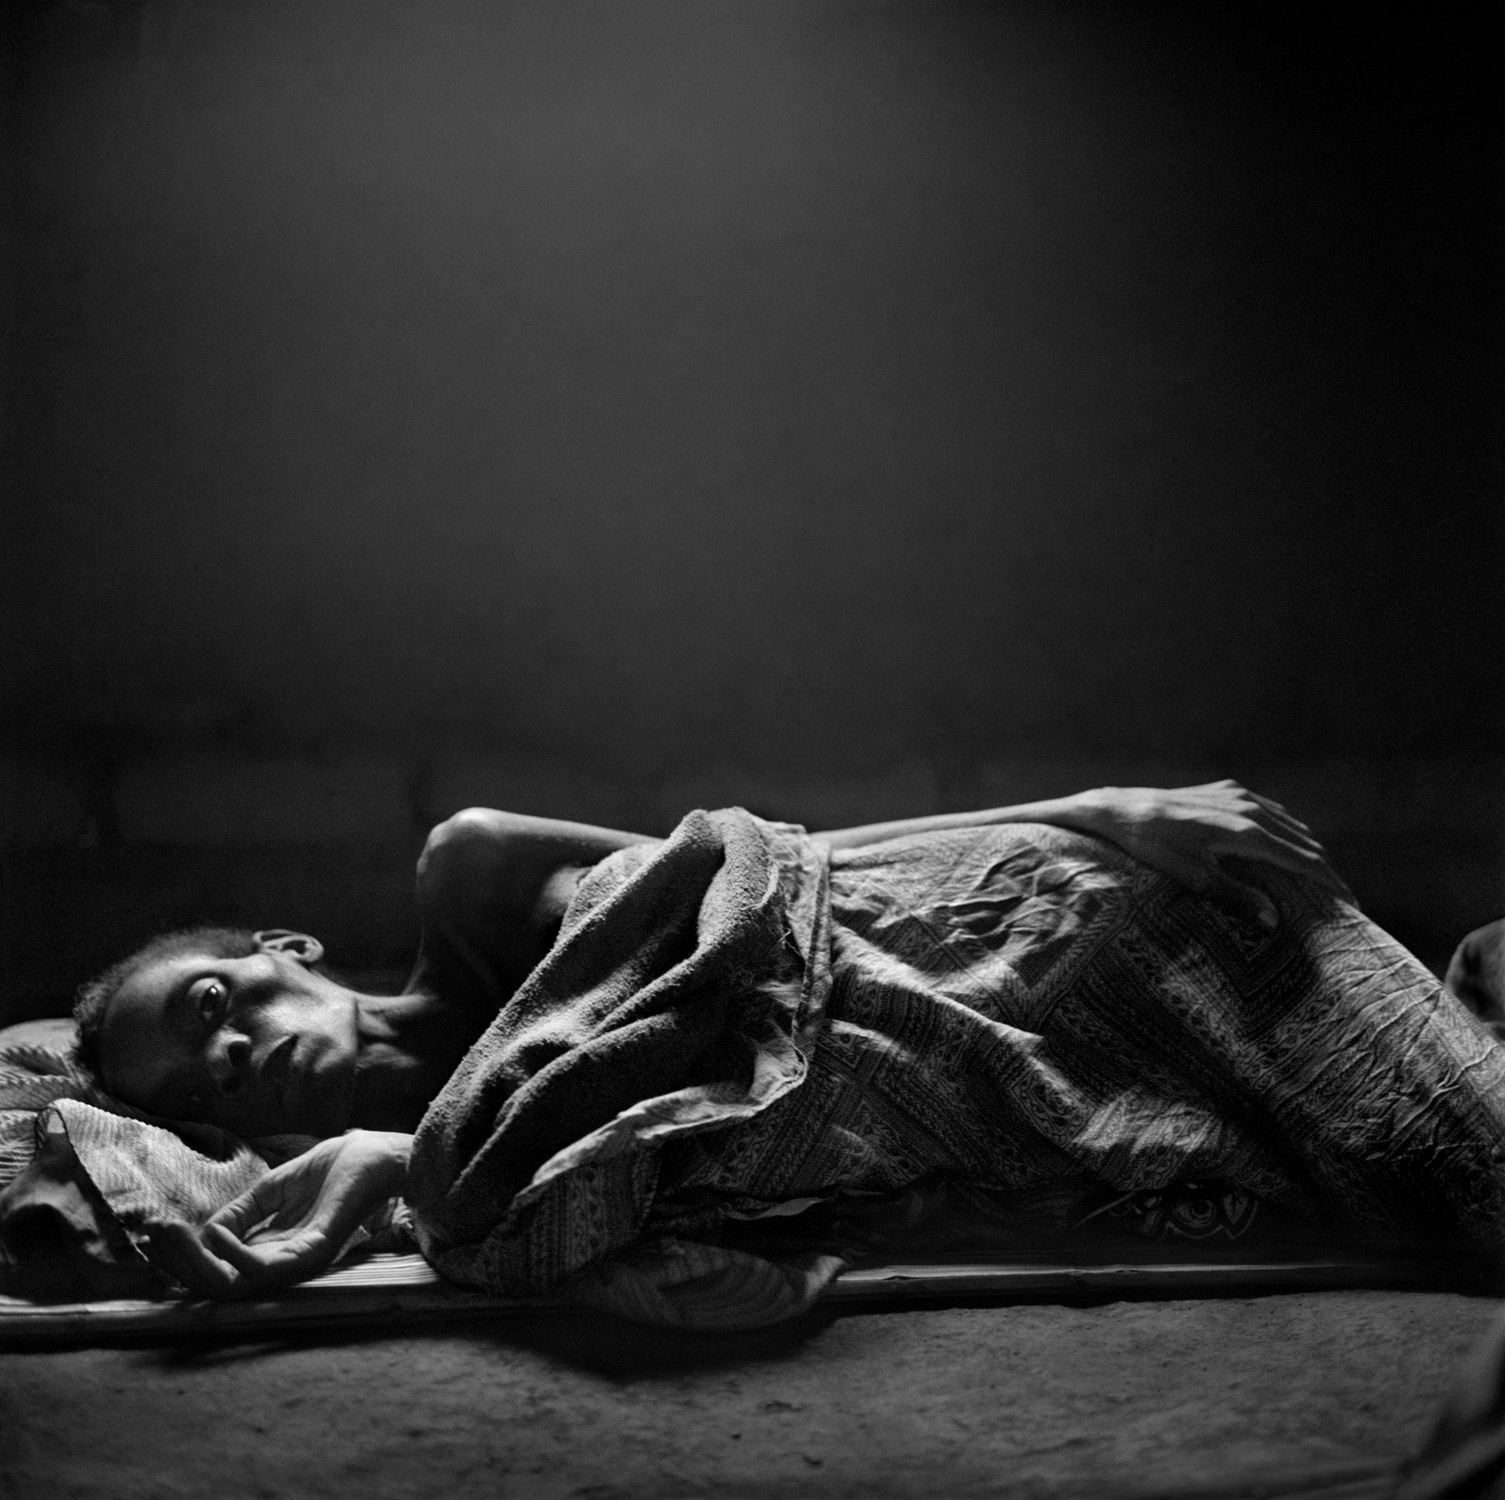 1997: Kristen Ashburn
                              
                              Stella Forty (42 yrs) lies dying of AIDS on the floor of her home. When she died in Nov 2006, her husband was left to care for their five children. Nsanje, Malawi.
                               I attended the Eddie Adams Workshop as a student at New York University and was pretty naive and eager. The workshop was my first introduction to the photography community. It was inspiring to meet the professionals who donated their time at the workshop. You could tell that everyone gave 100% of themselves and truly cared about the student participants.
                              
                              Eddie was still alive at that time. His tribute to photographers killed while covering stories gave me goose bumps. It was then that I began to understand the bond between photographers. I also remember standing there thinking about the journeys of those who died and wondering where mine would take me. I suppose that was also my first real lesson in photojournalism—no one ever knows what’s in store for them or how much they will sacrifice while working.
                              
                              Eddie’s tribute to those lost could not be any more relevant than today as we continue to lose exceptional photographers and friends.